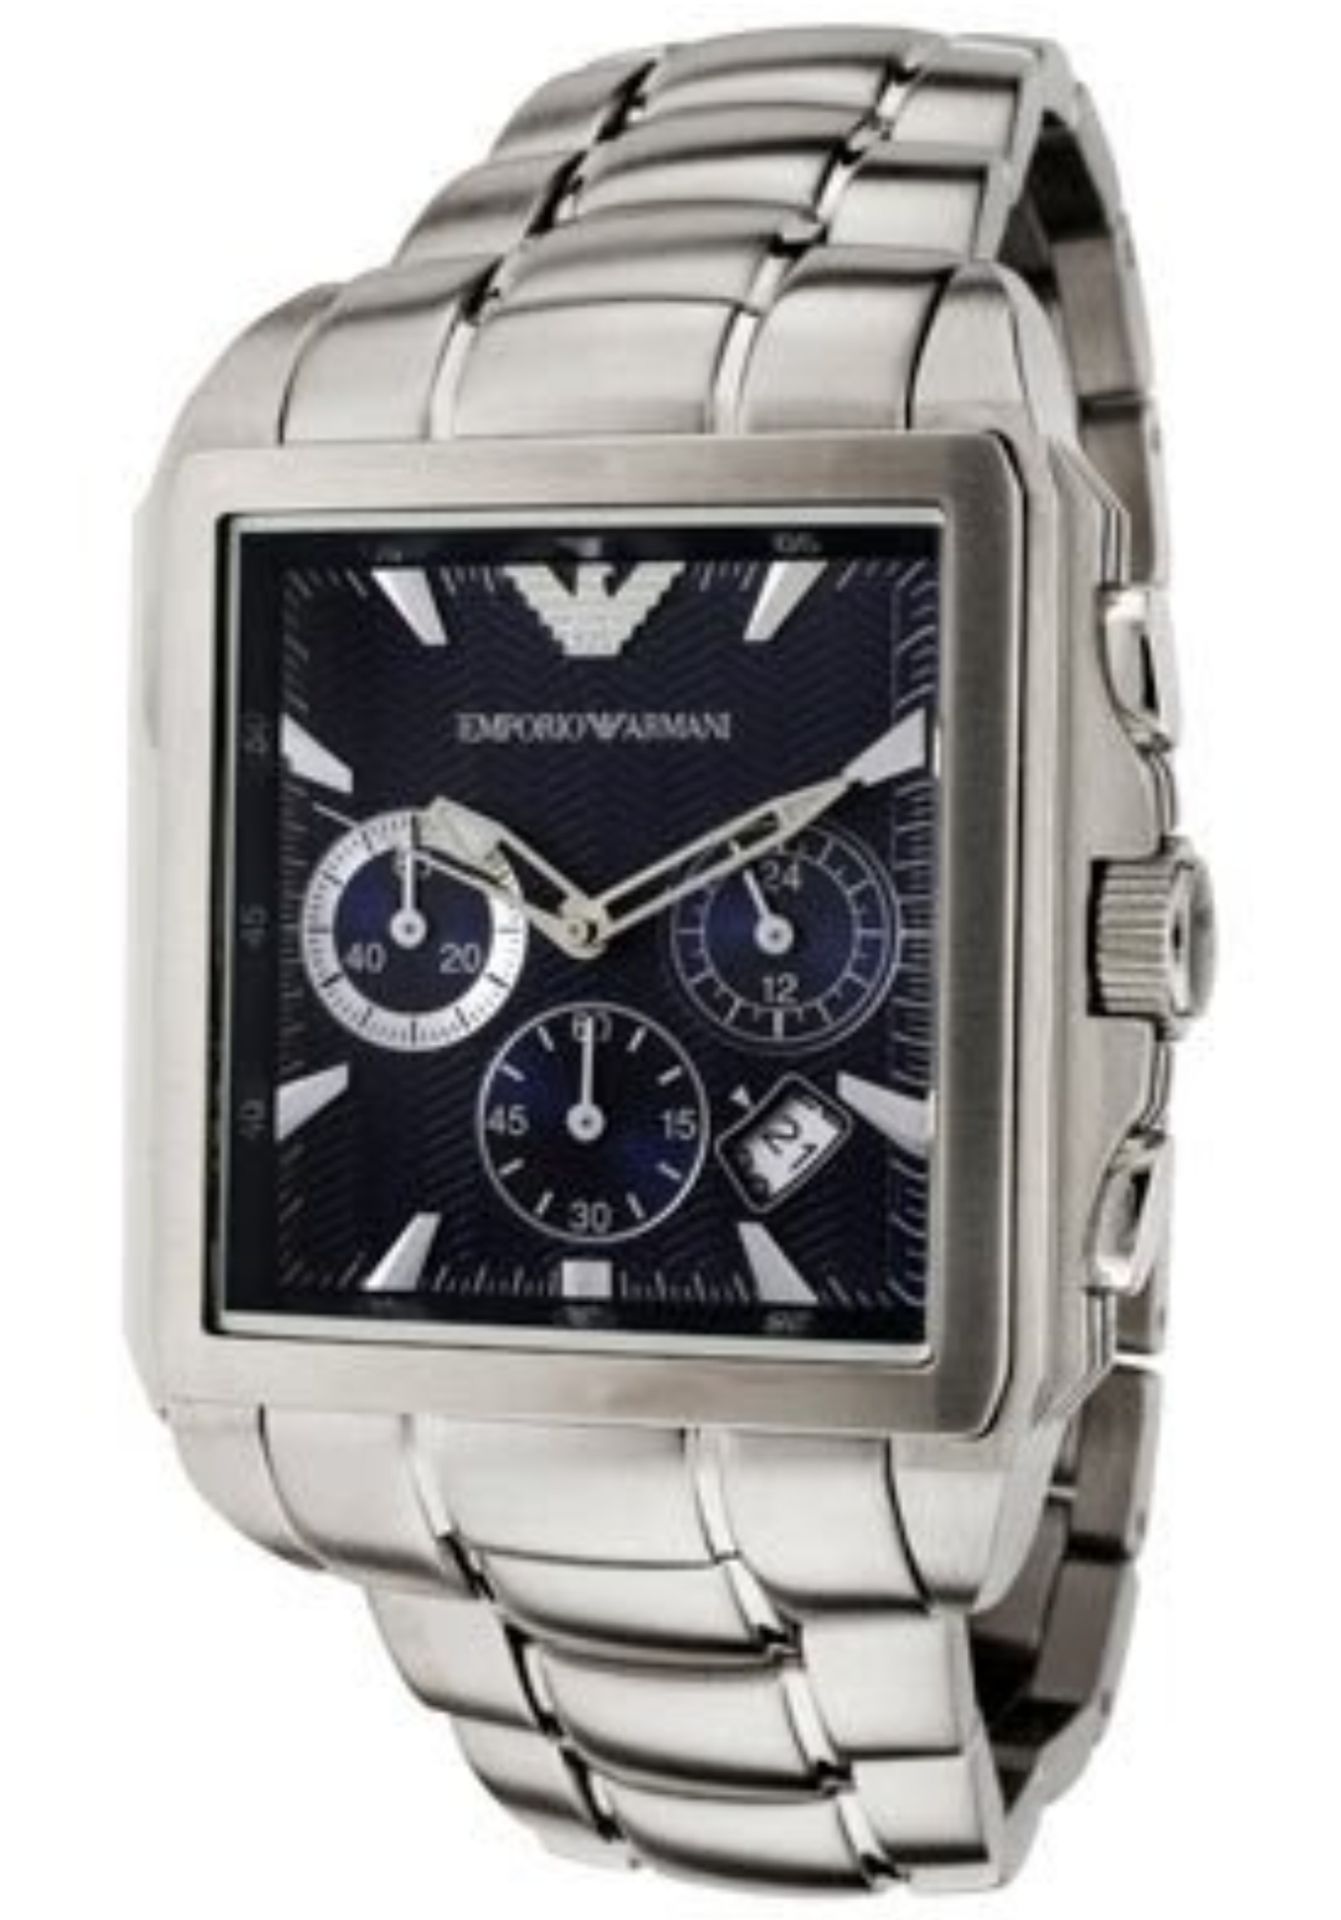 Emporio Armani AR0660 Men's Square Dial Silver Stainless Steel Bracelet Chronograph Watch - Image 3 of 8